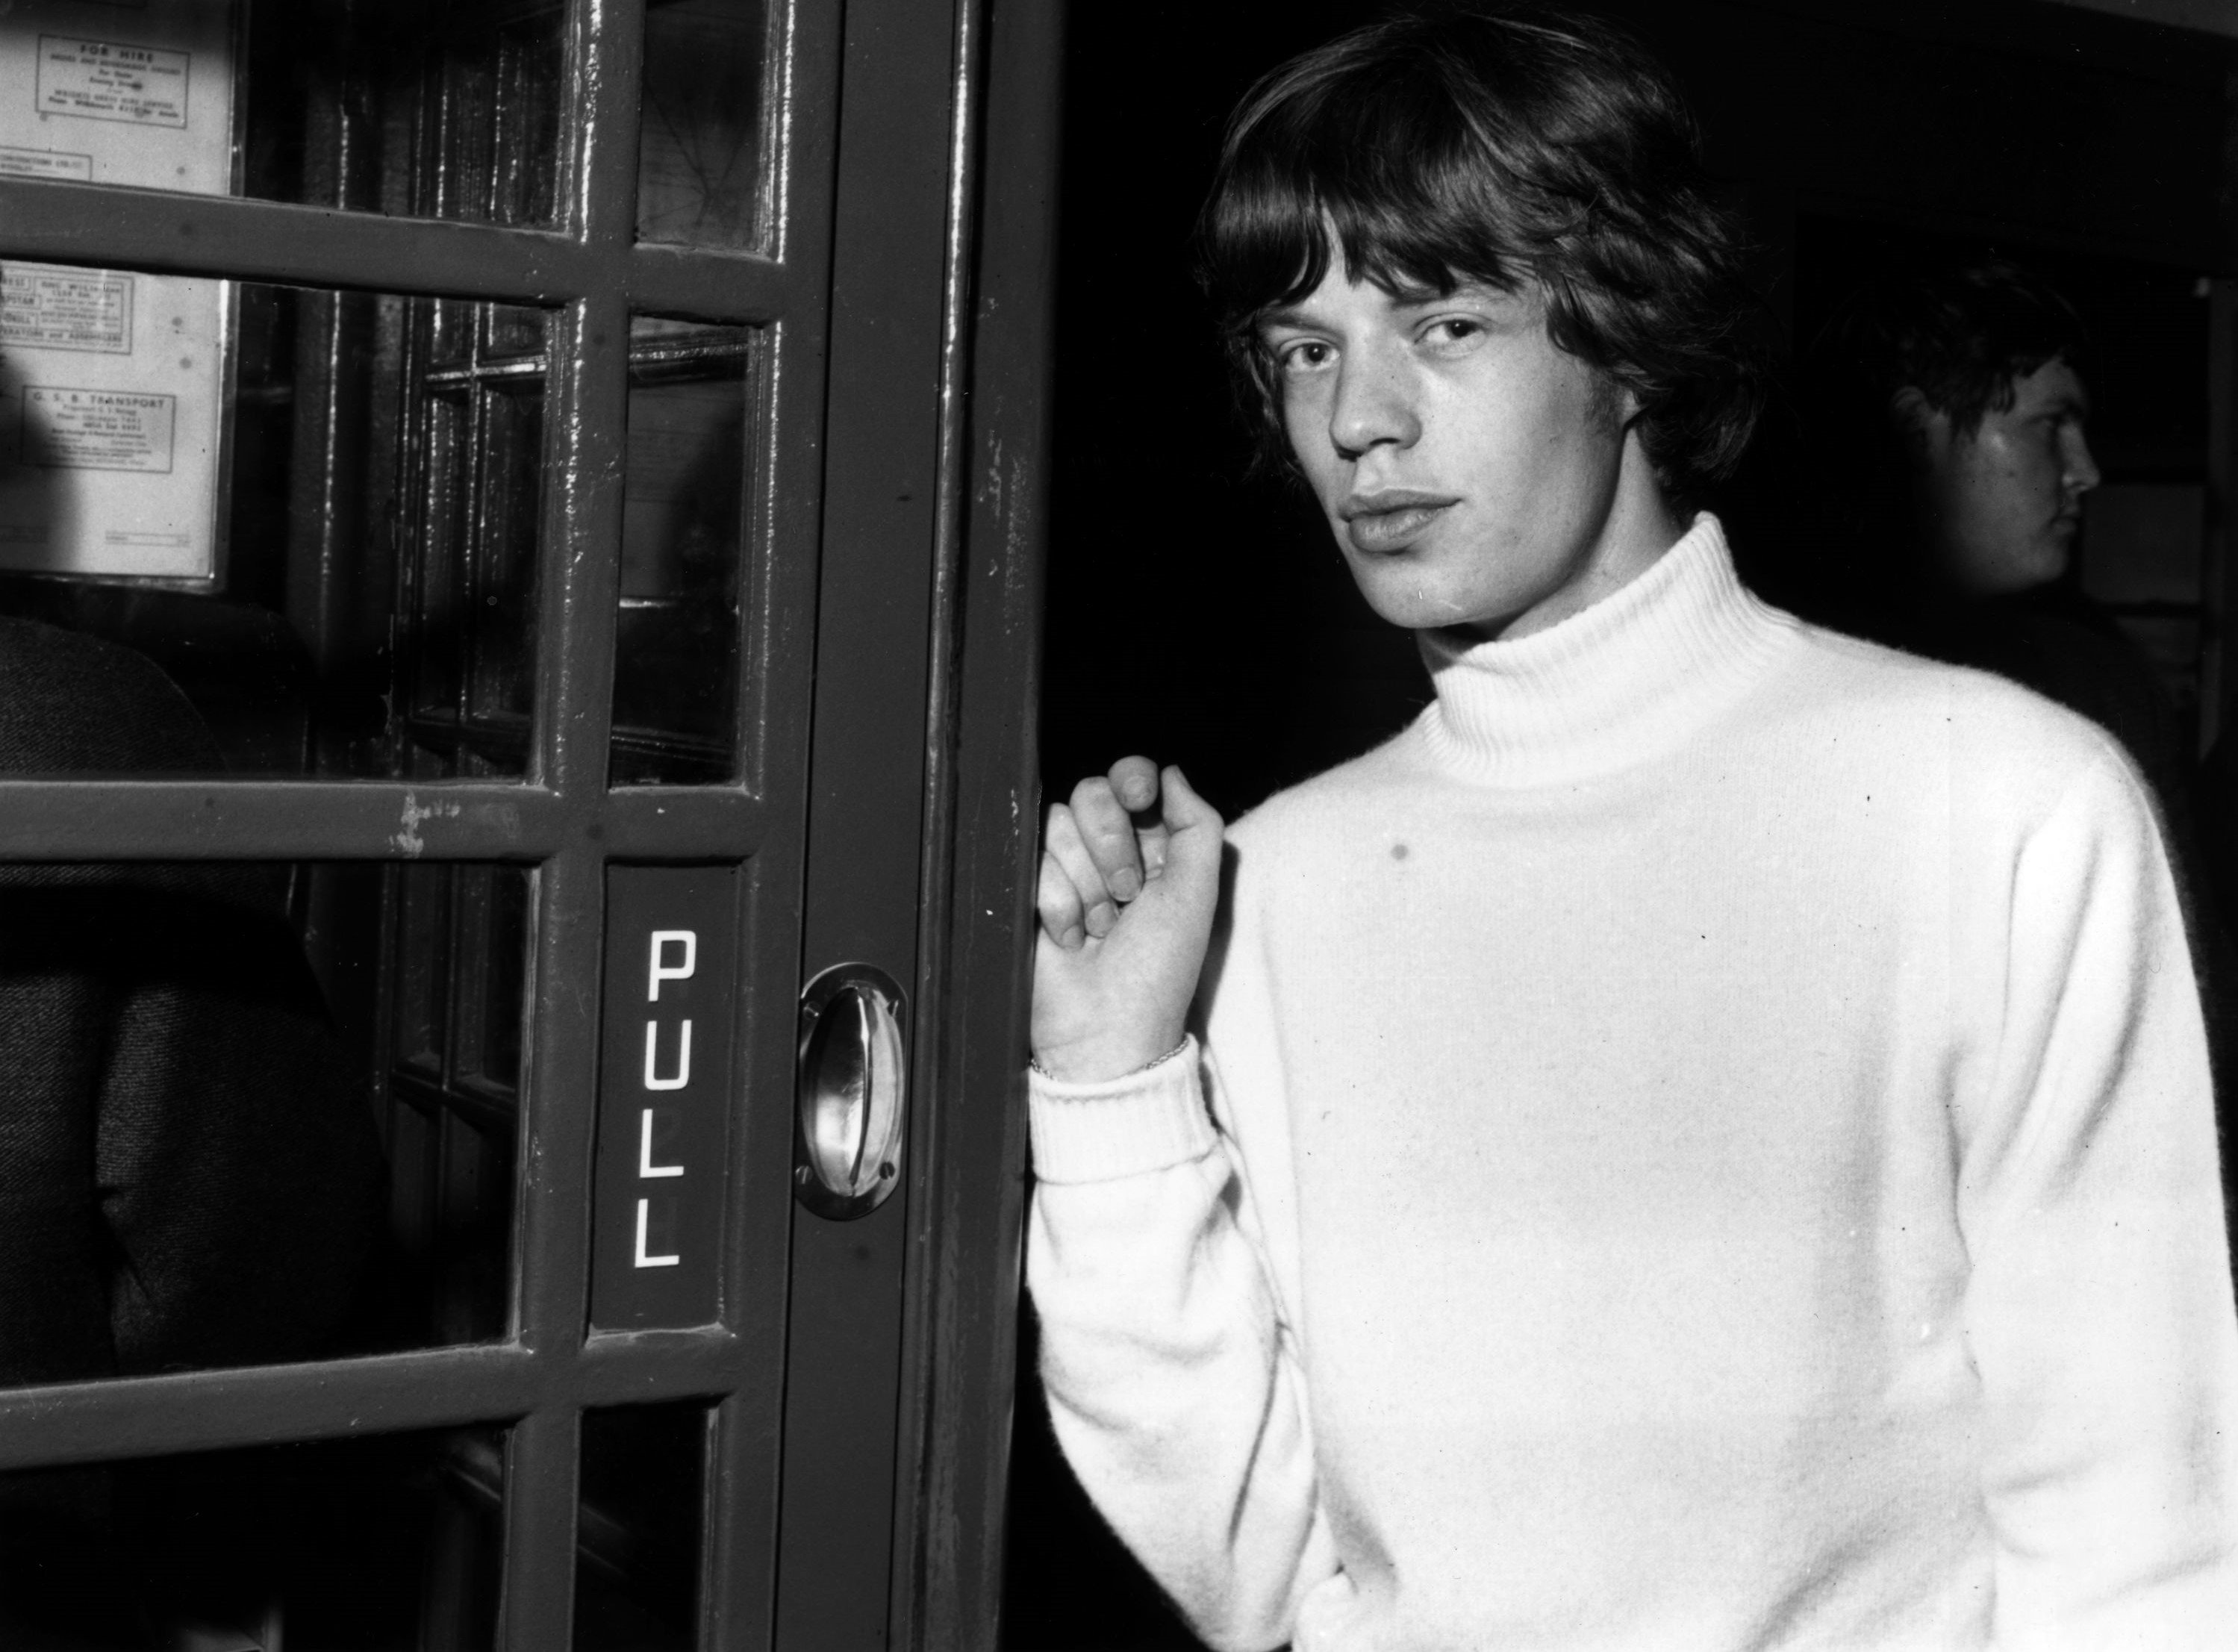 The Rolling Stones’ Mick Jagger near a door